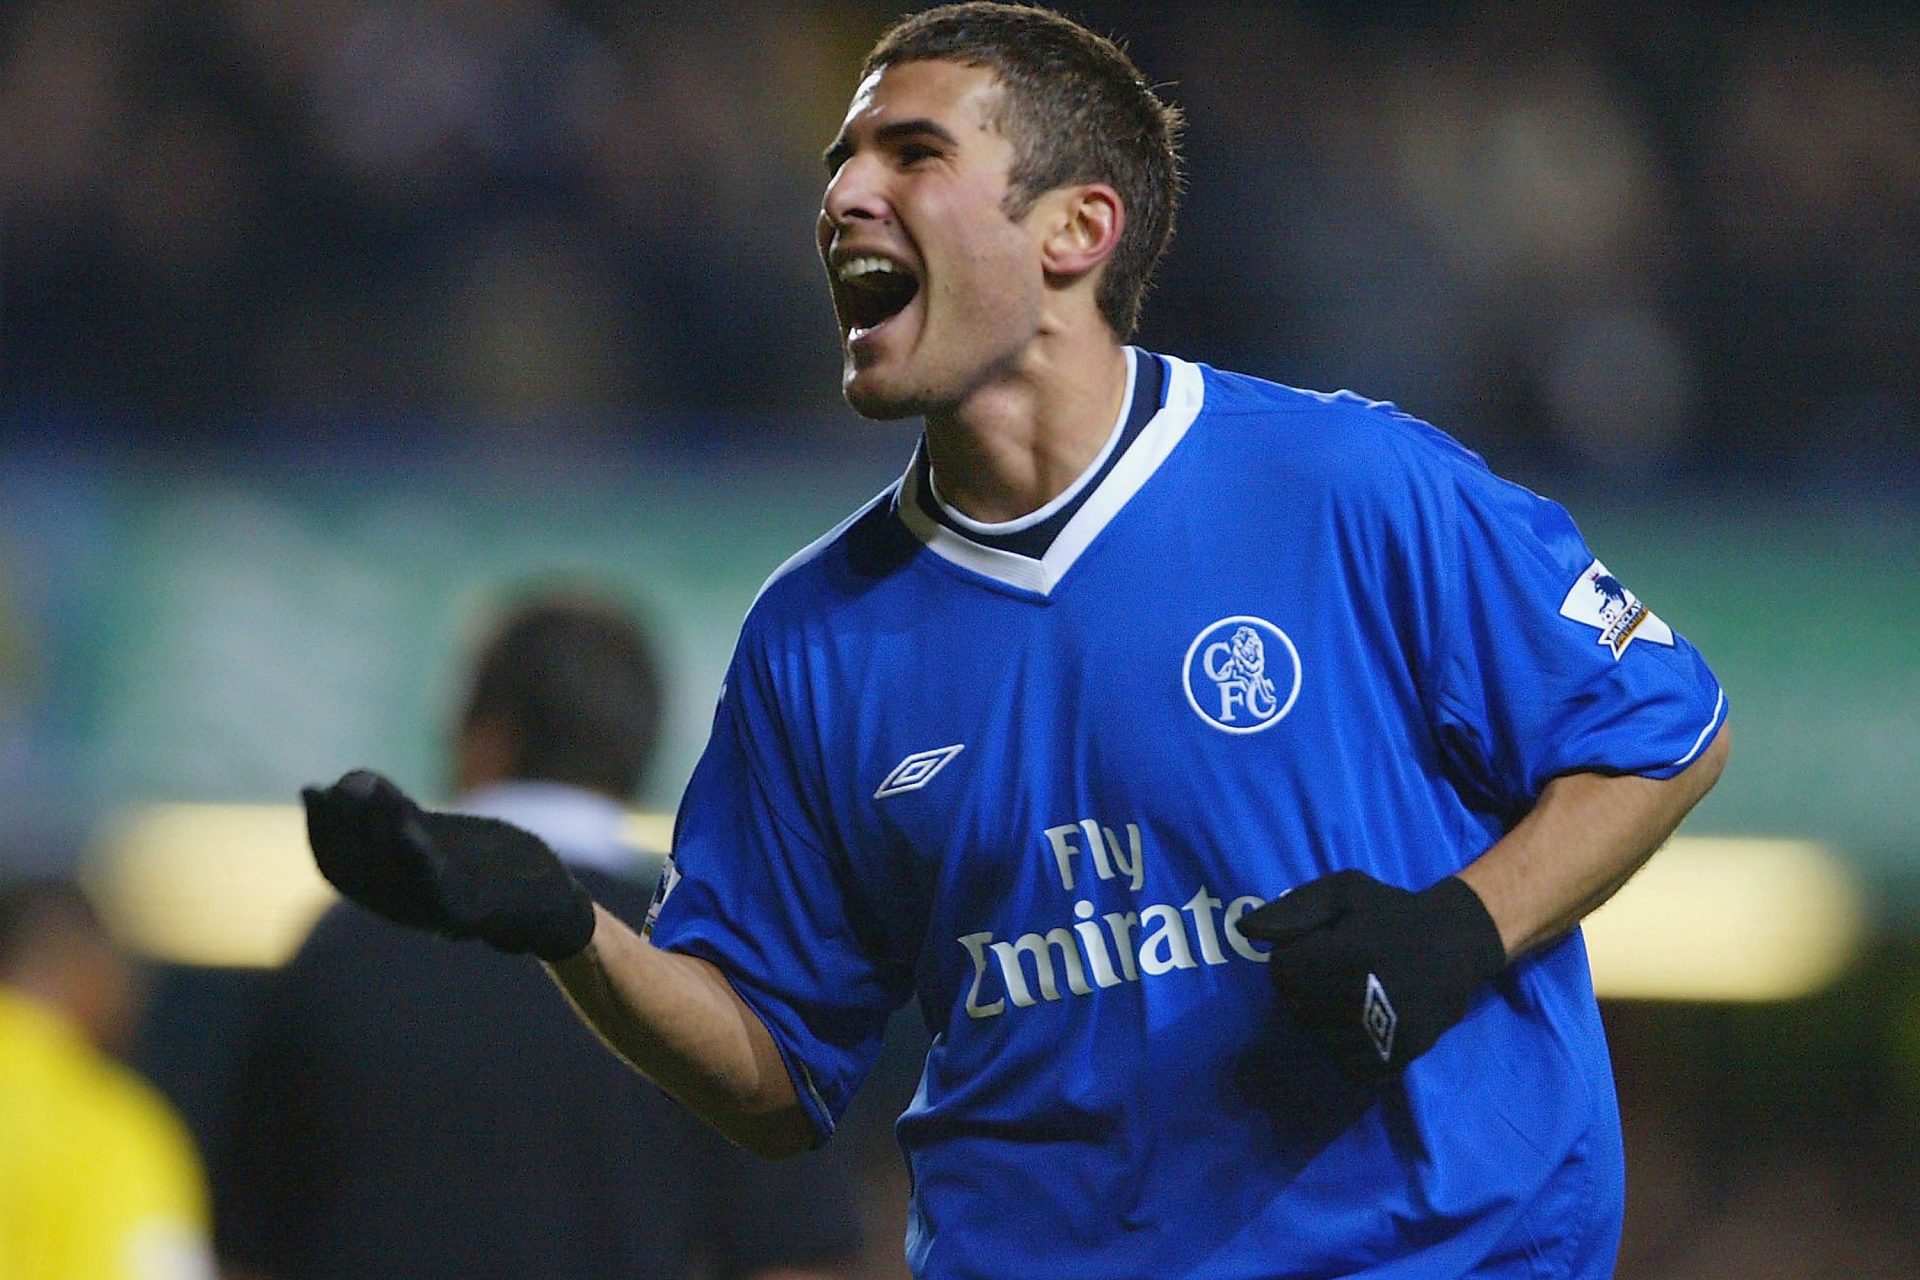 Blood sucking, poetry and a 17 million fine: what happened to former Chelsea star Adrian Mutu?